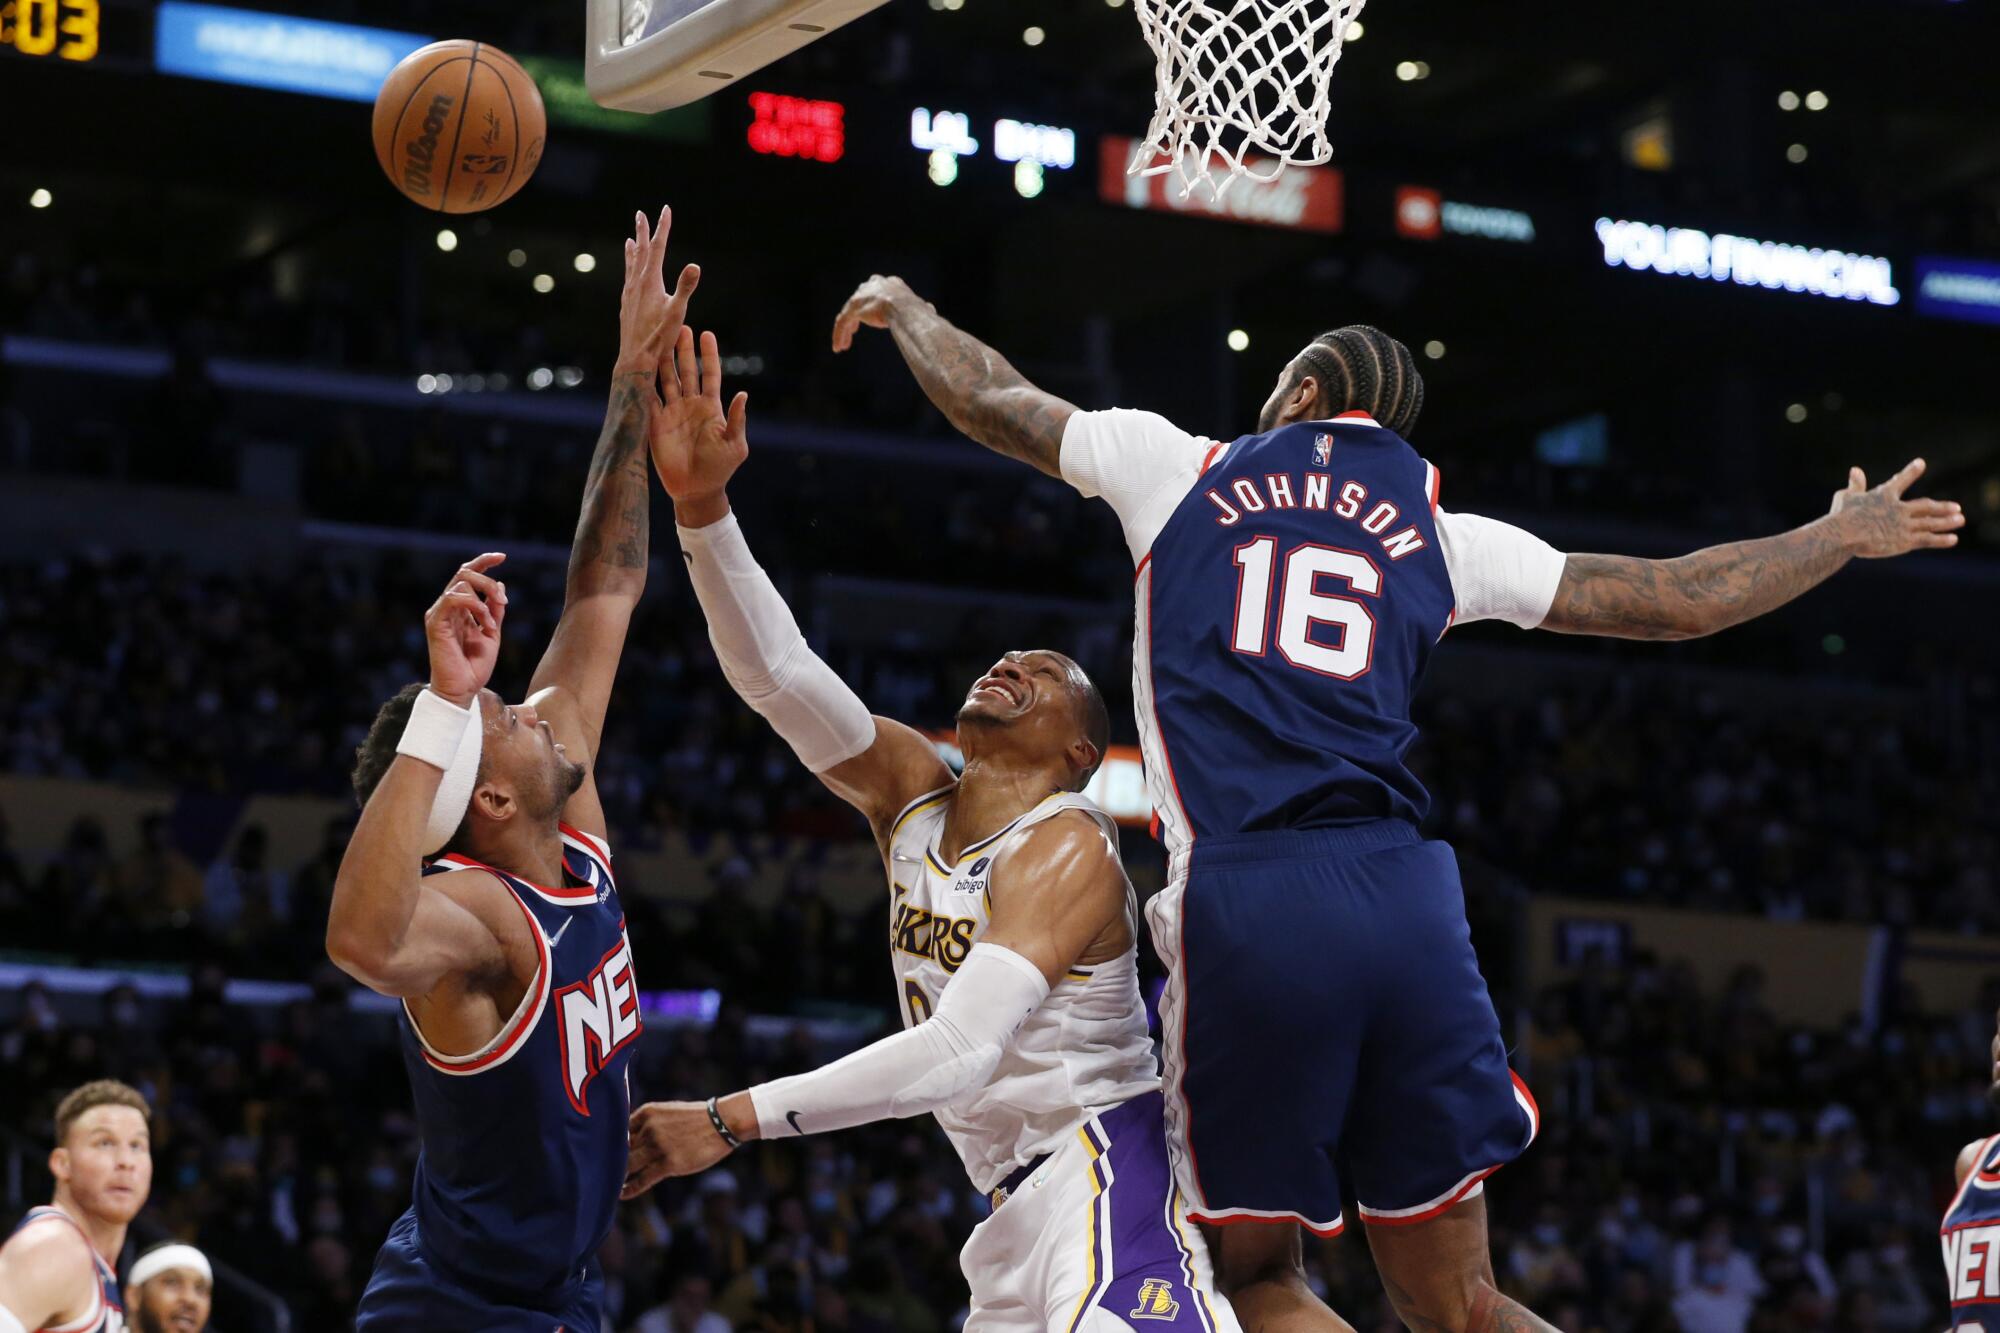 Lakers guard Russell Westbrook is fouled as he drives to the basket between two Brooklyn Nets players.